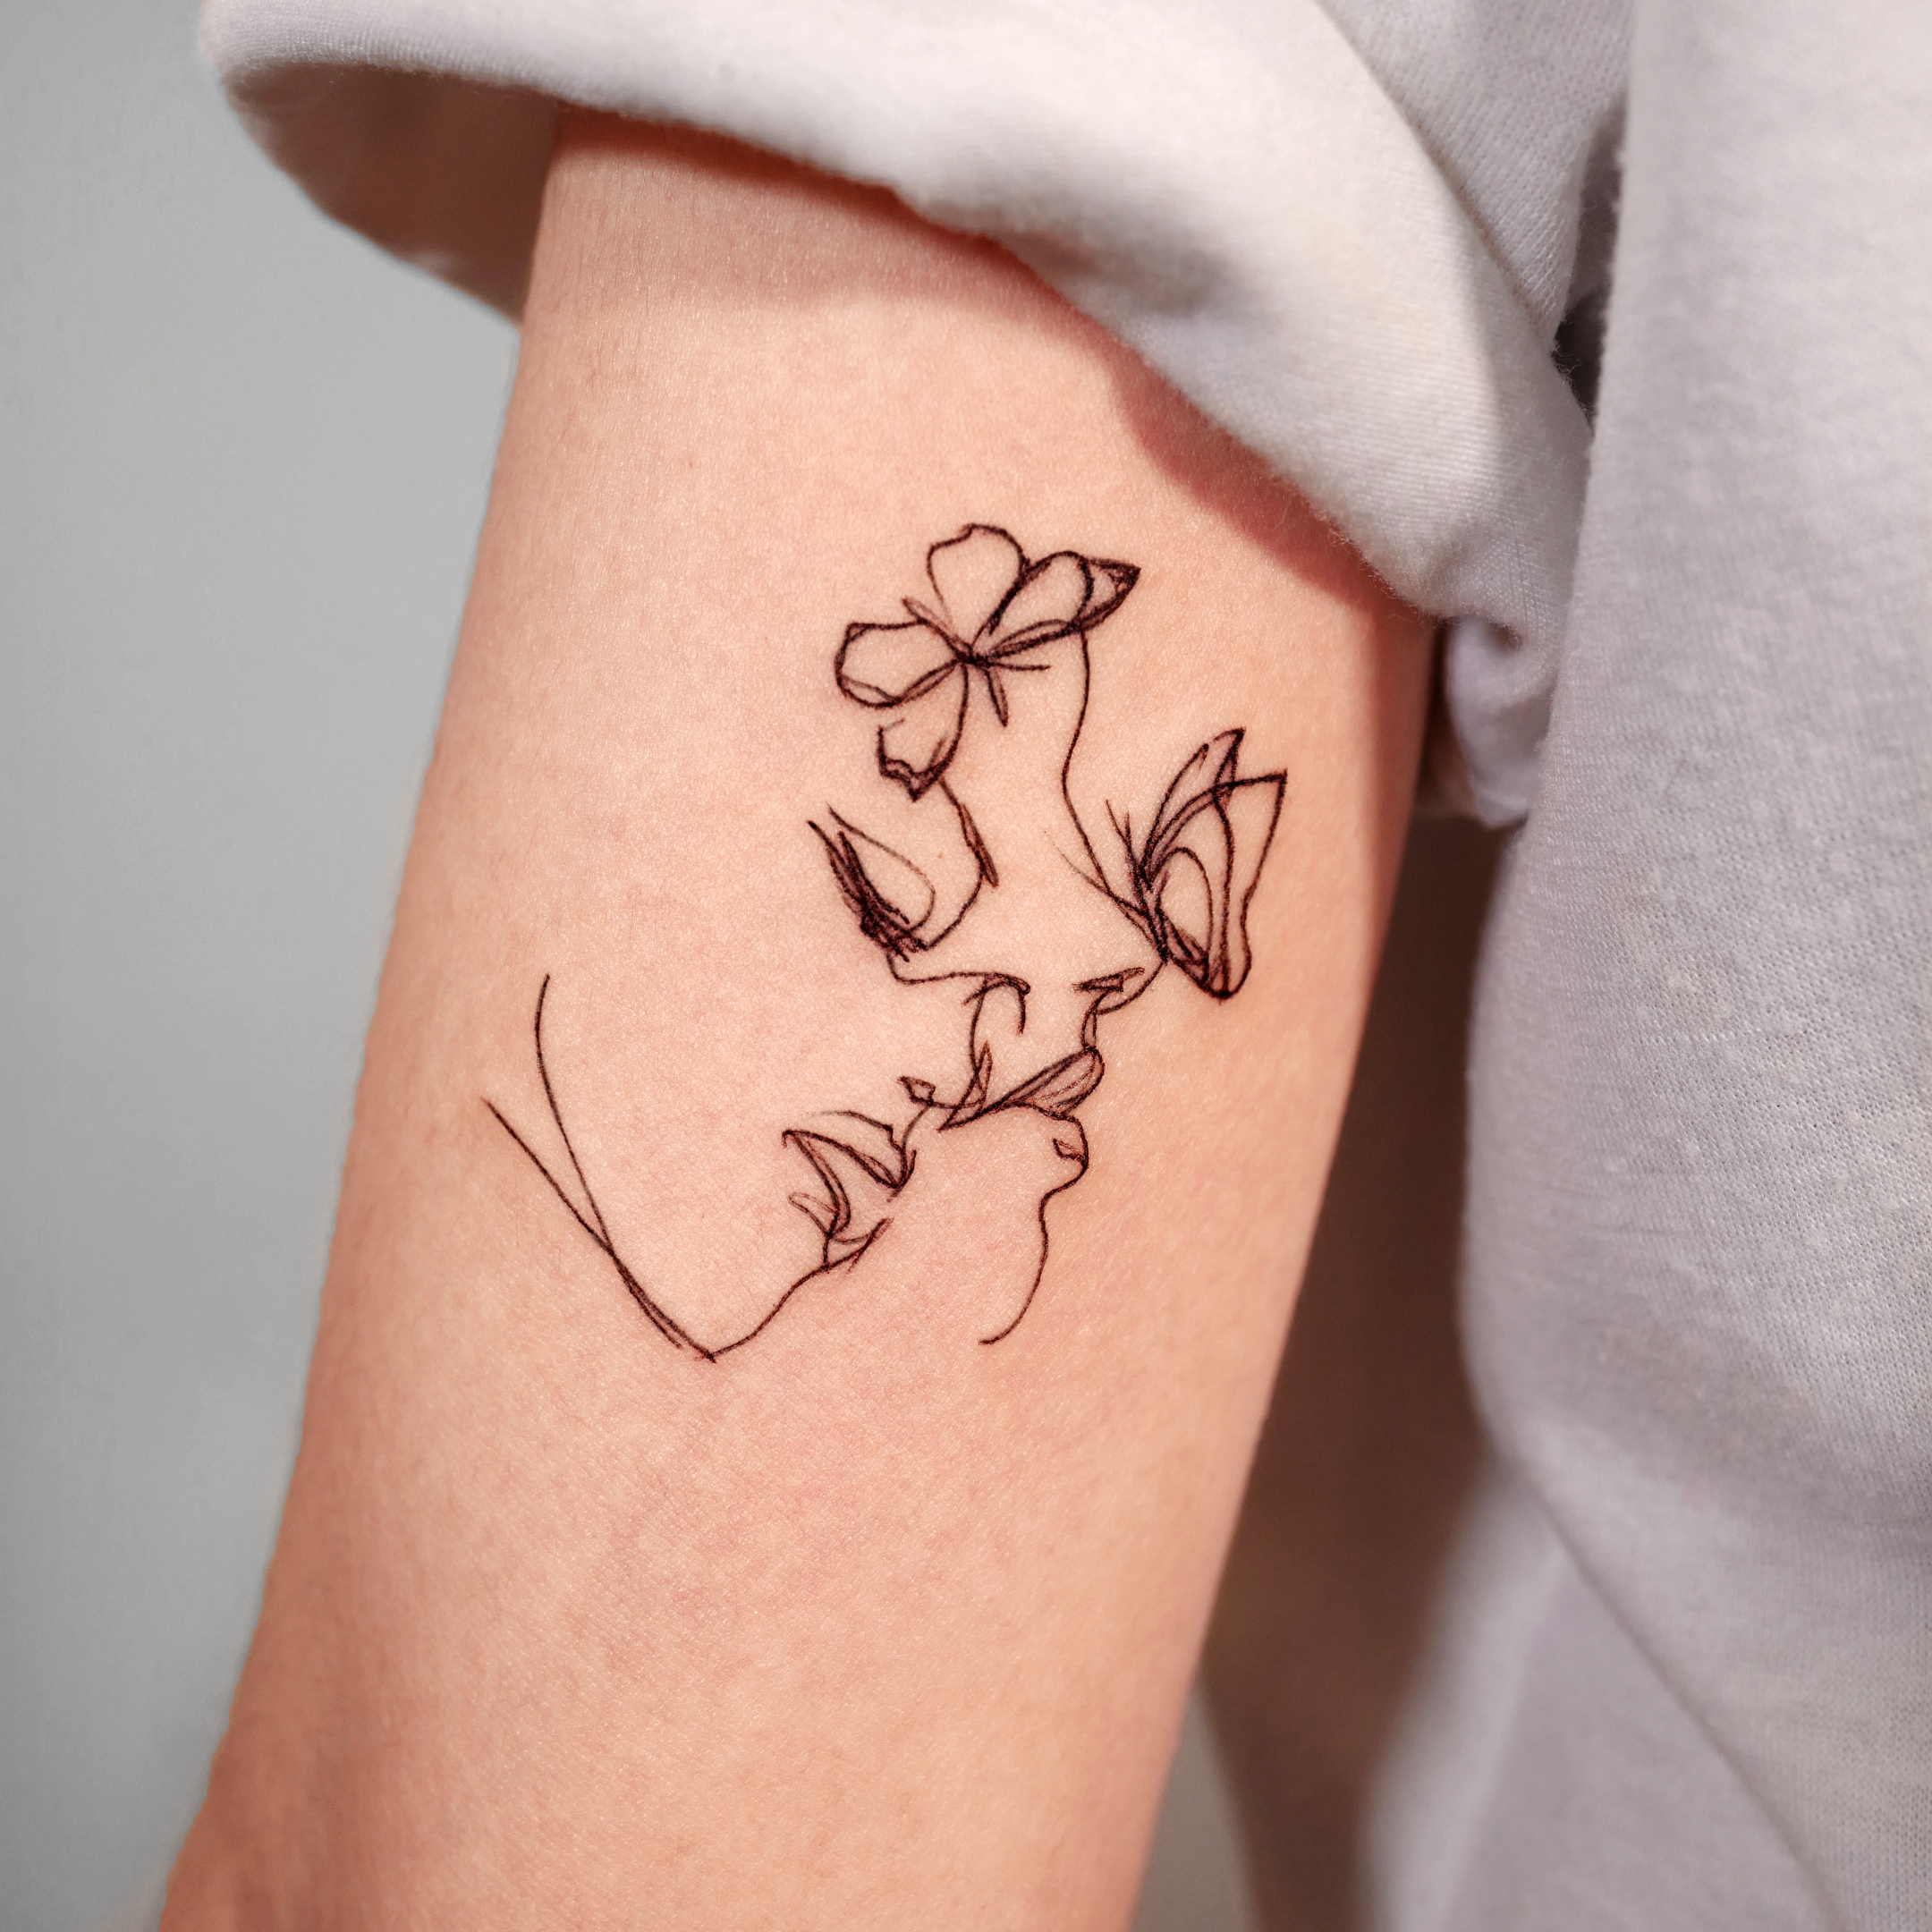 The best fine line tattoo artists to book in KL